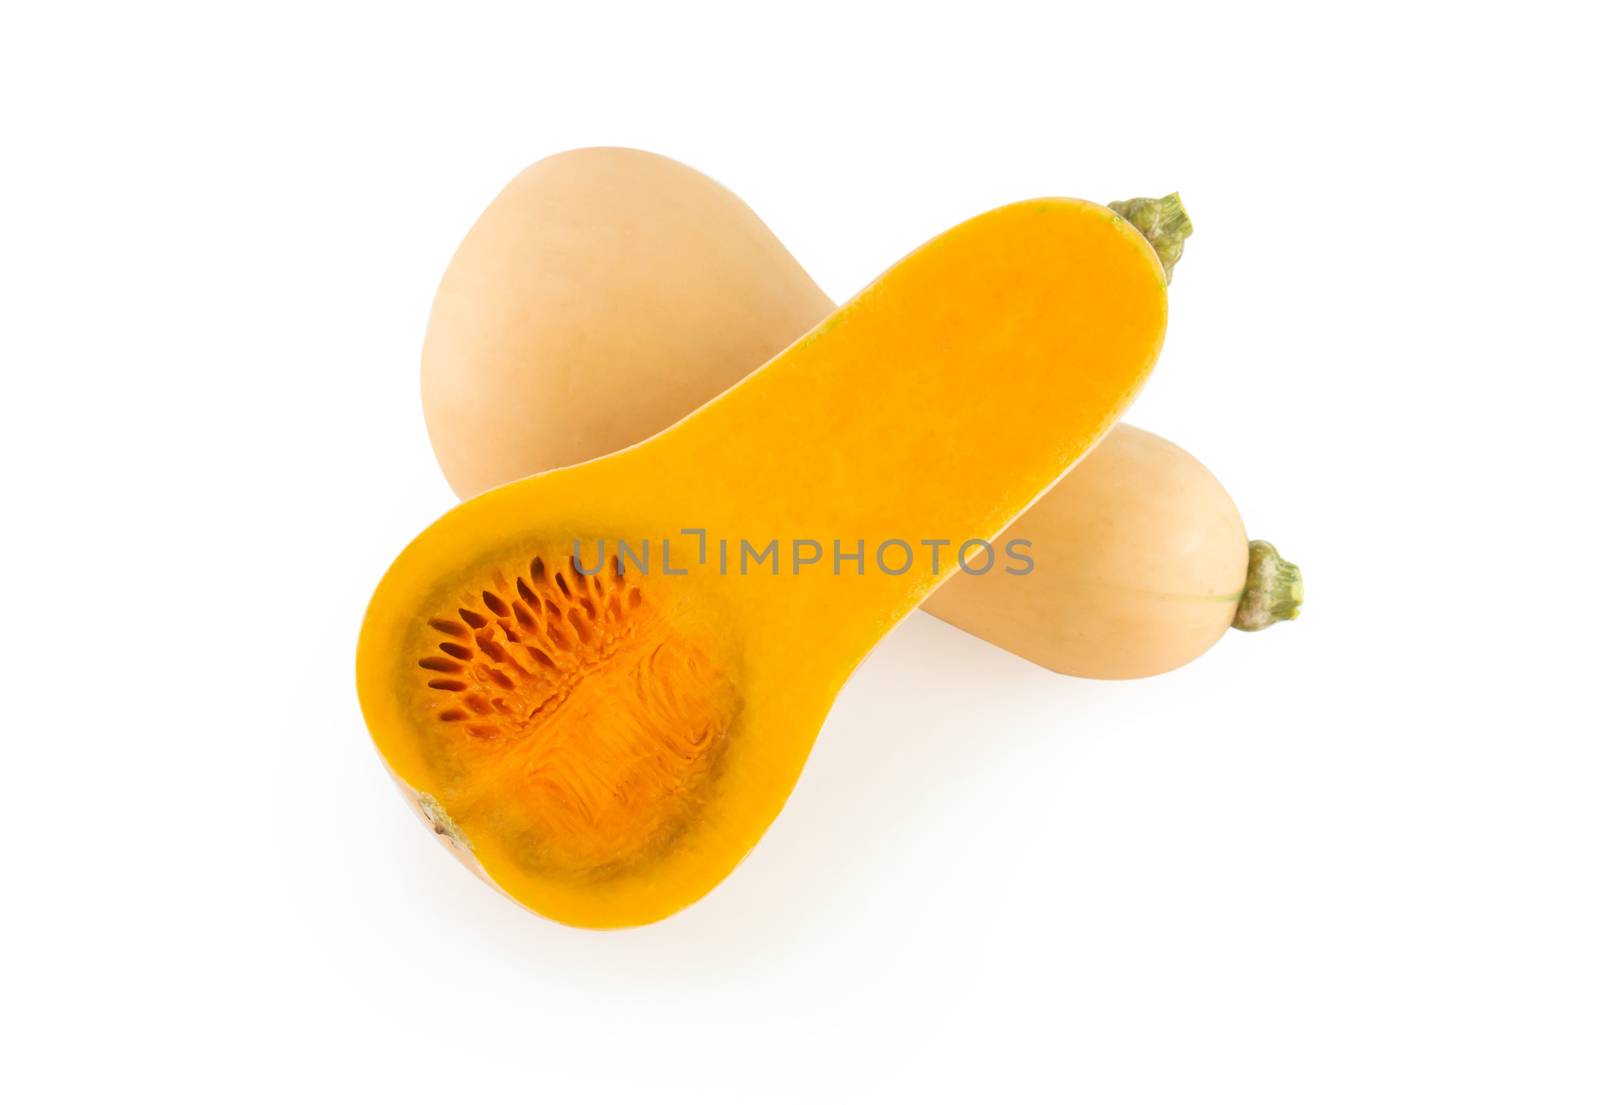 Butternut squash with sliced isolated on white background, food  by pt.pongsak@gmail.com